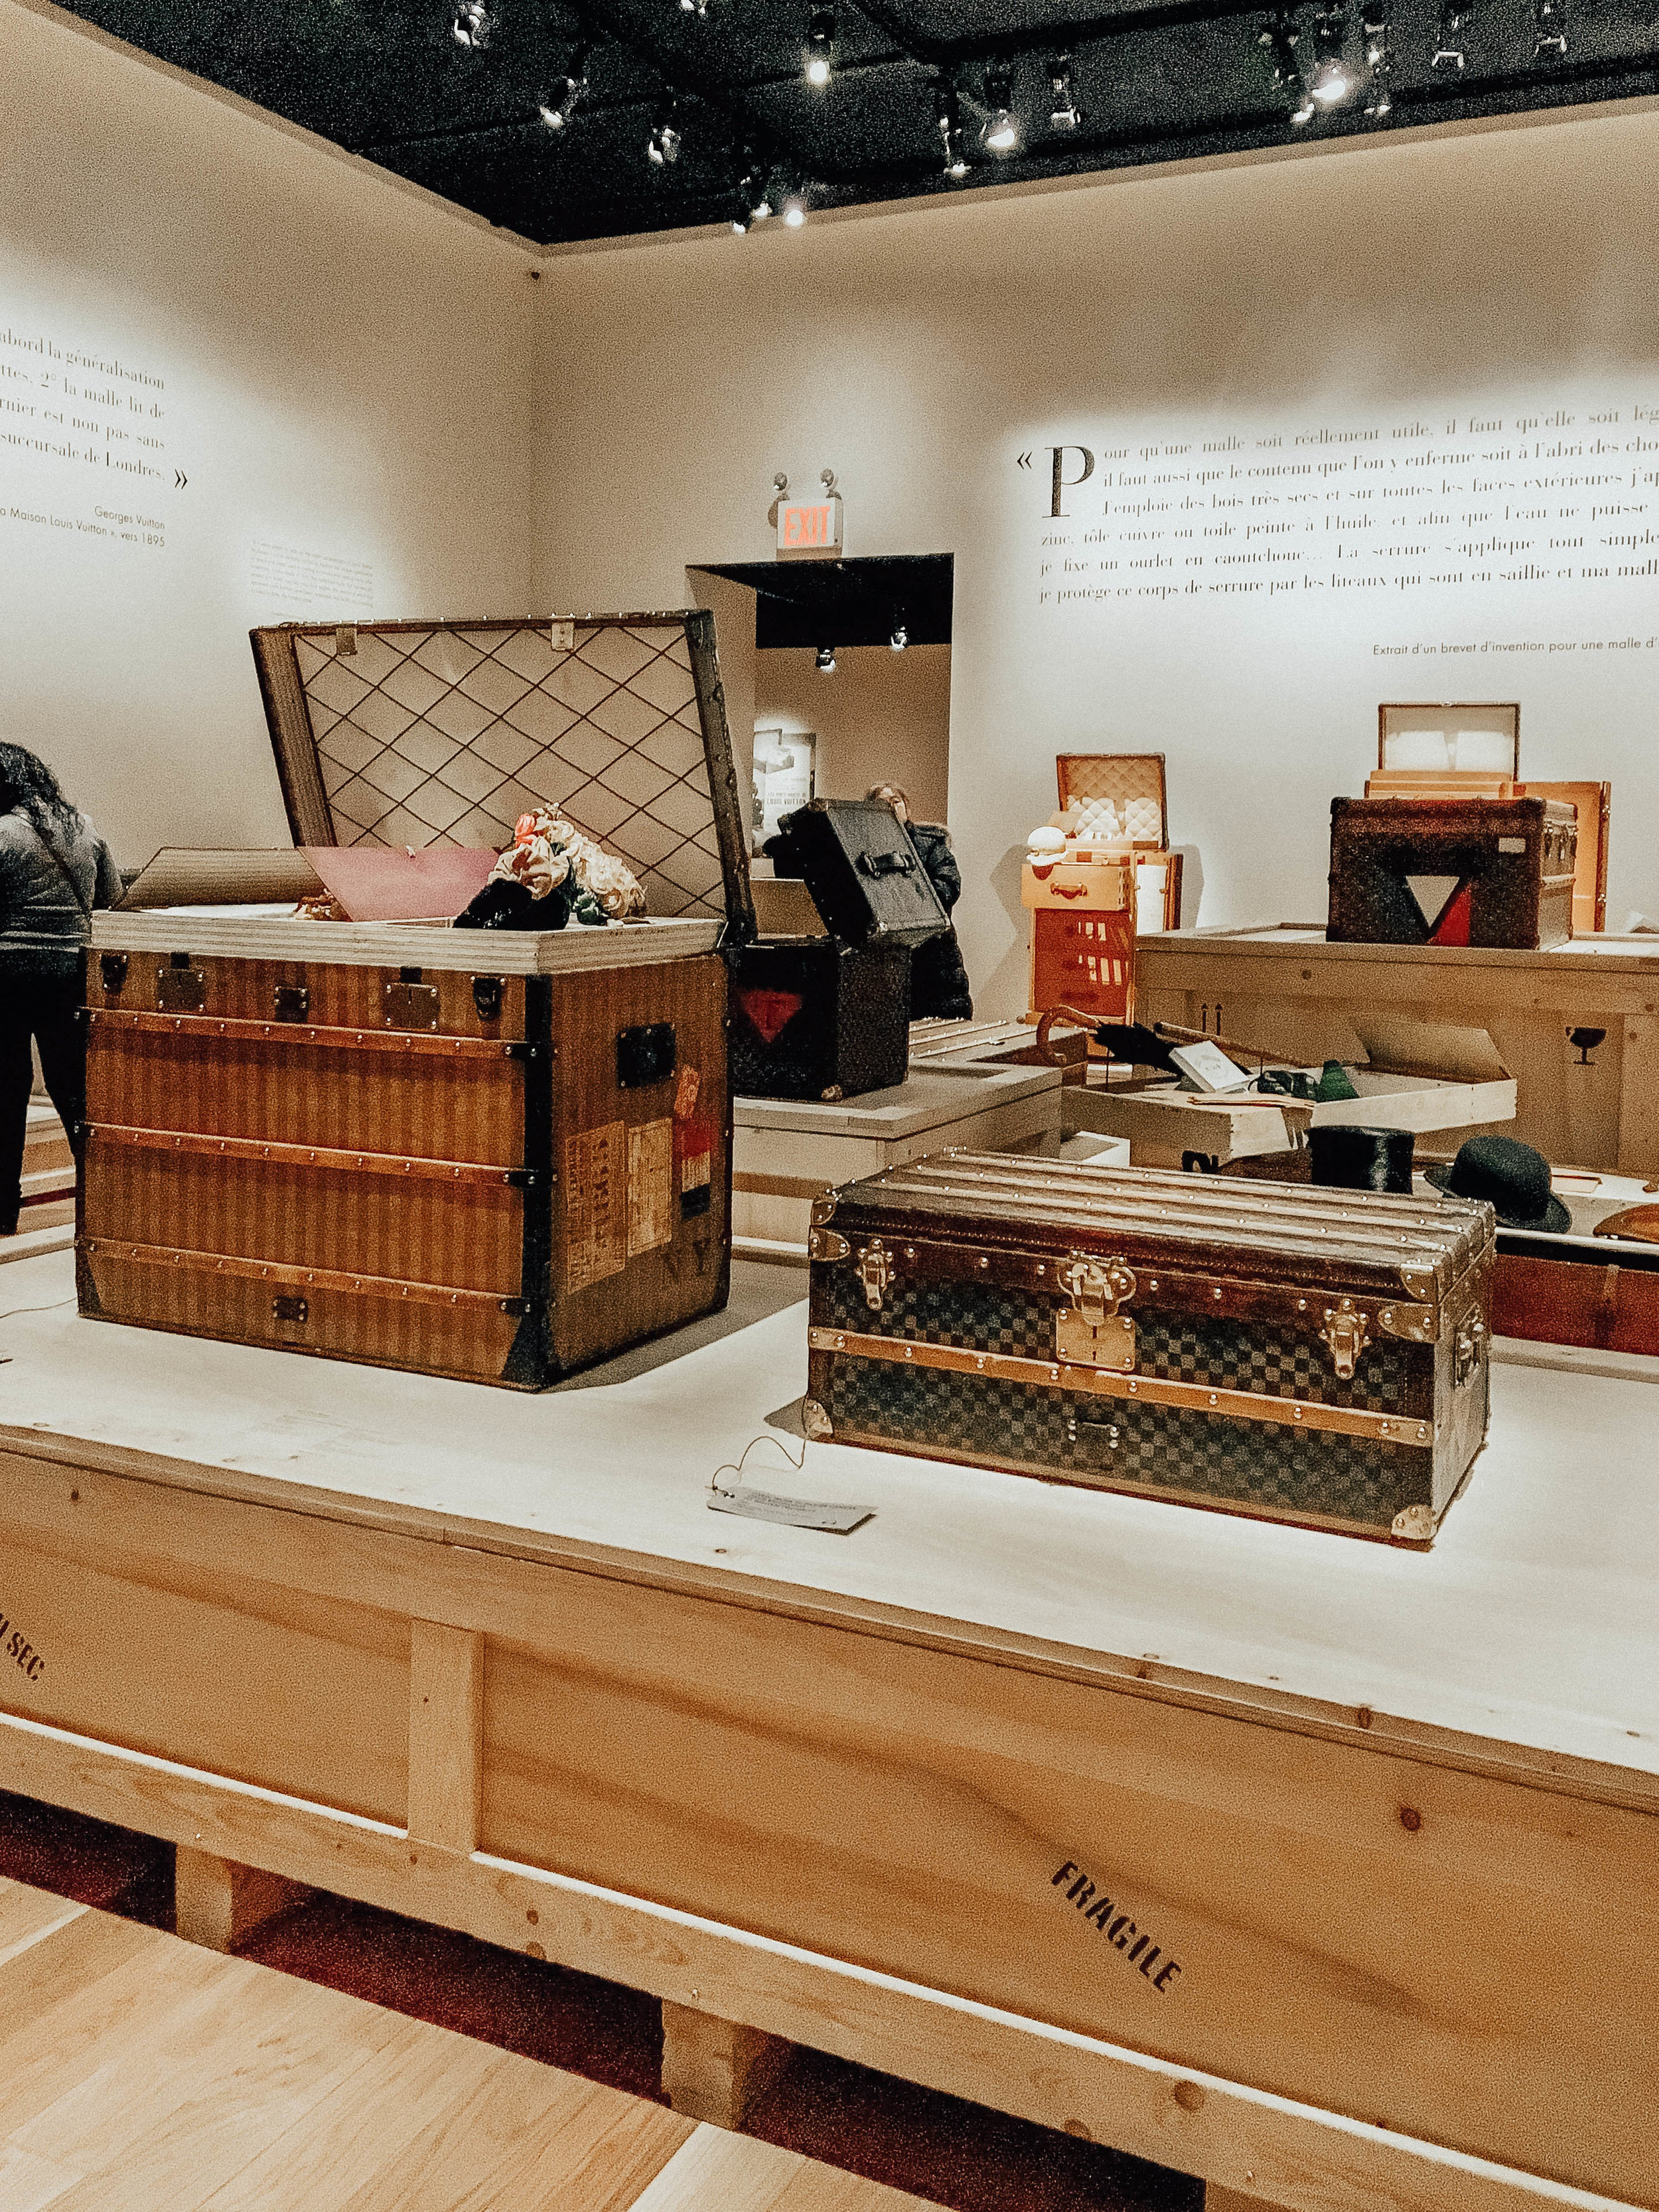 200 Years of Louis Vuitton Trunks